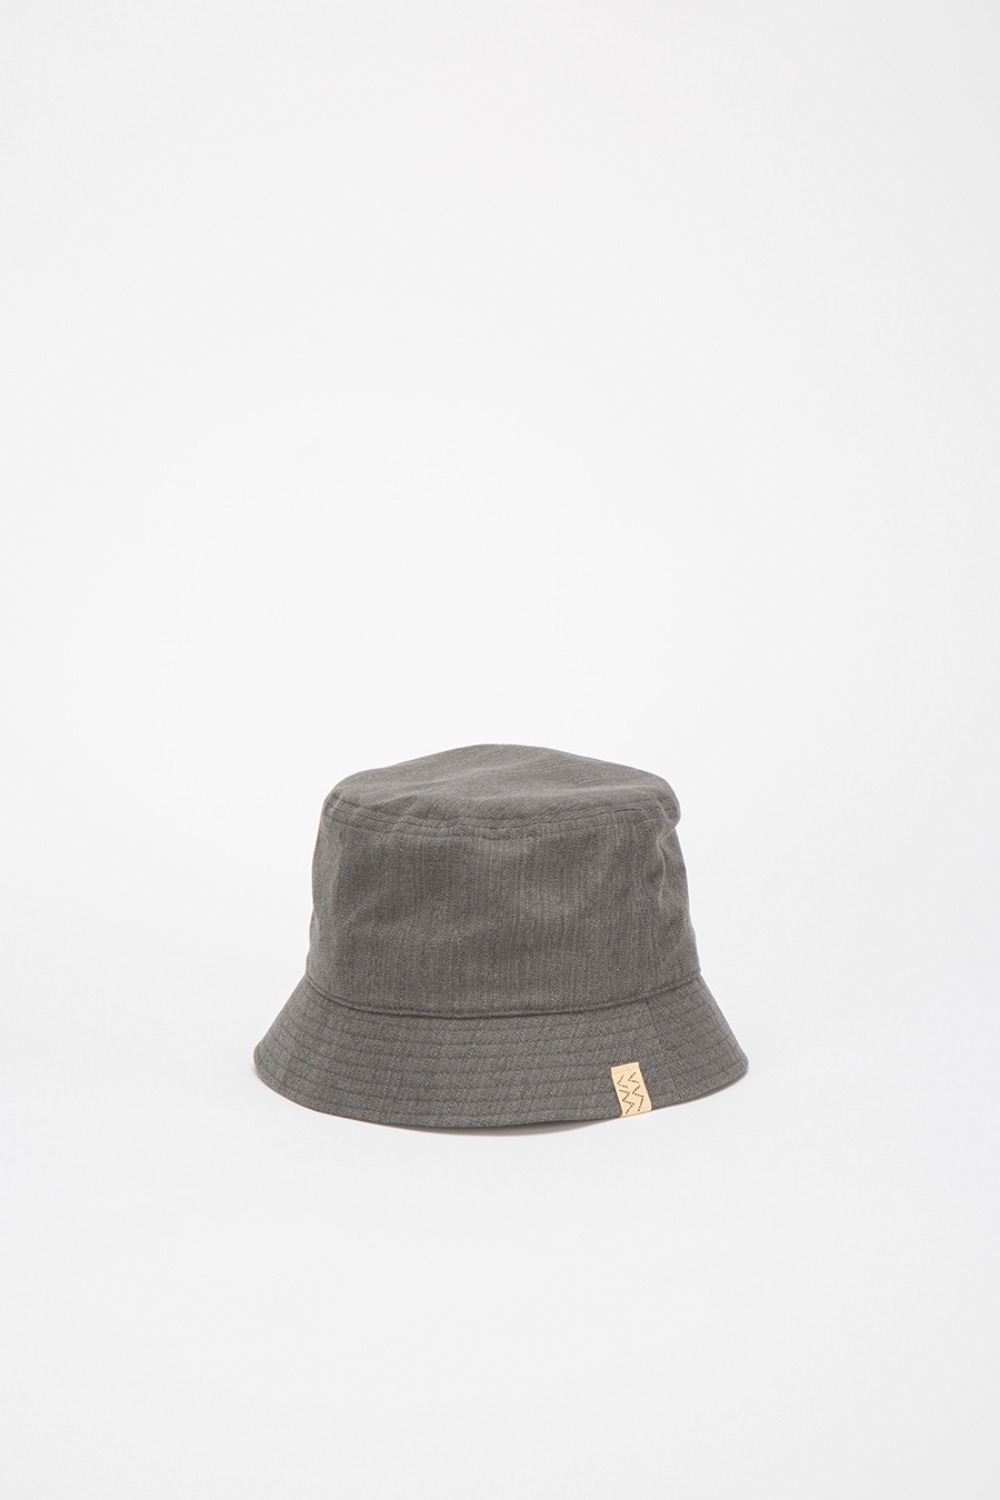 DOME BACKET HAT GREY